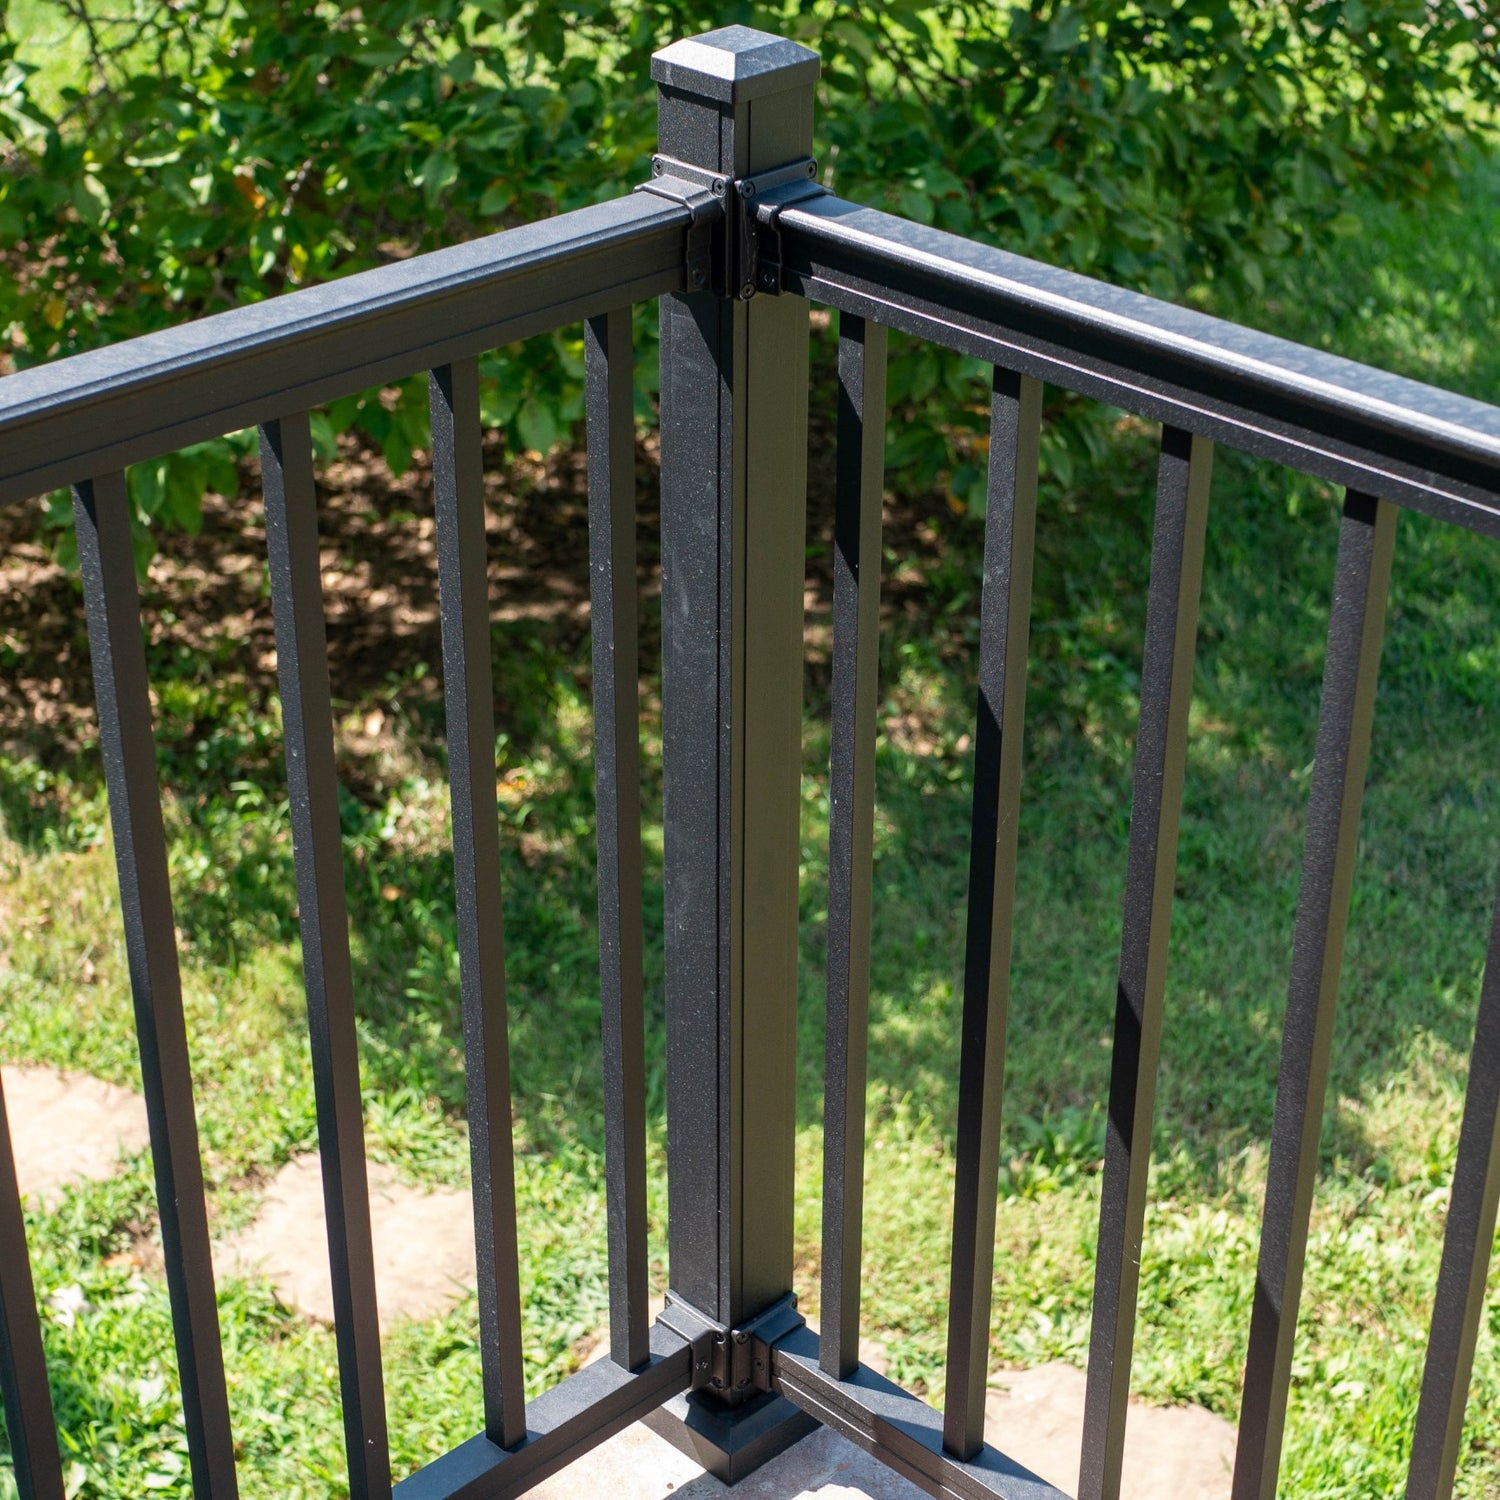 Advantage Post showen as a corner post with railing attaching on adjacent sides. 38 inch advantage posts are used for level railing, but do not include brackts, rails, balusters, cap or flair.